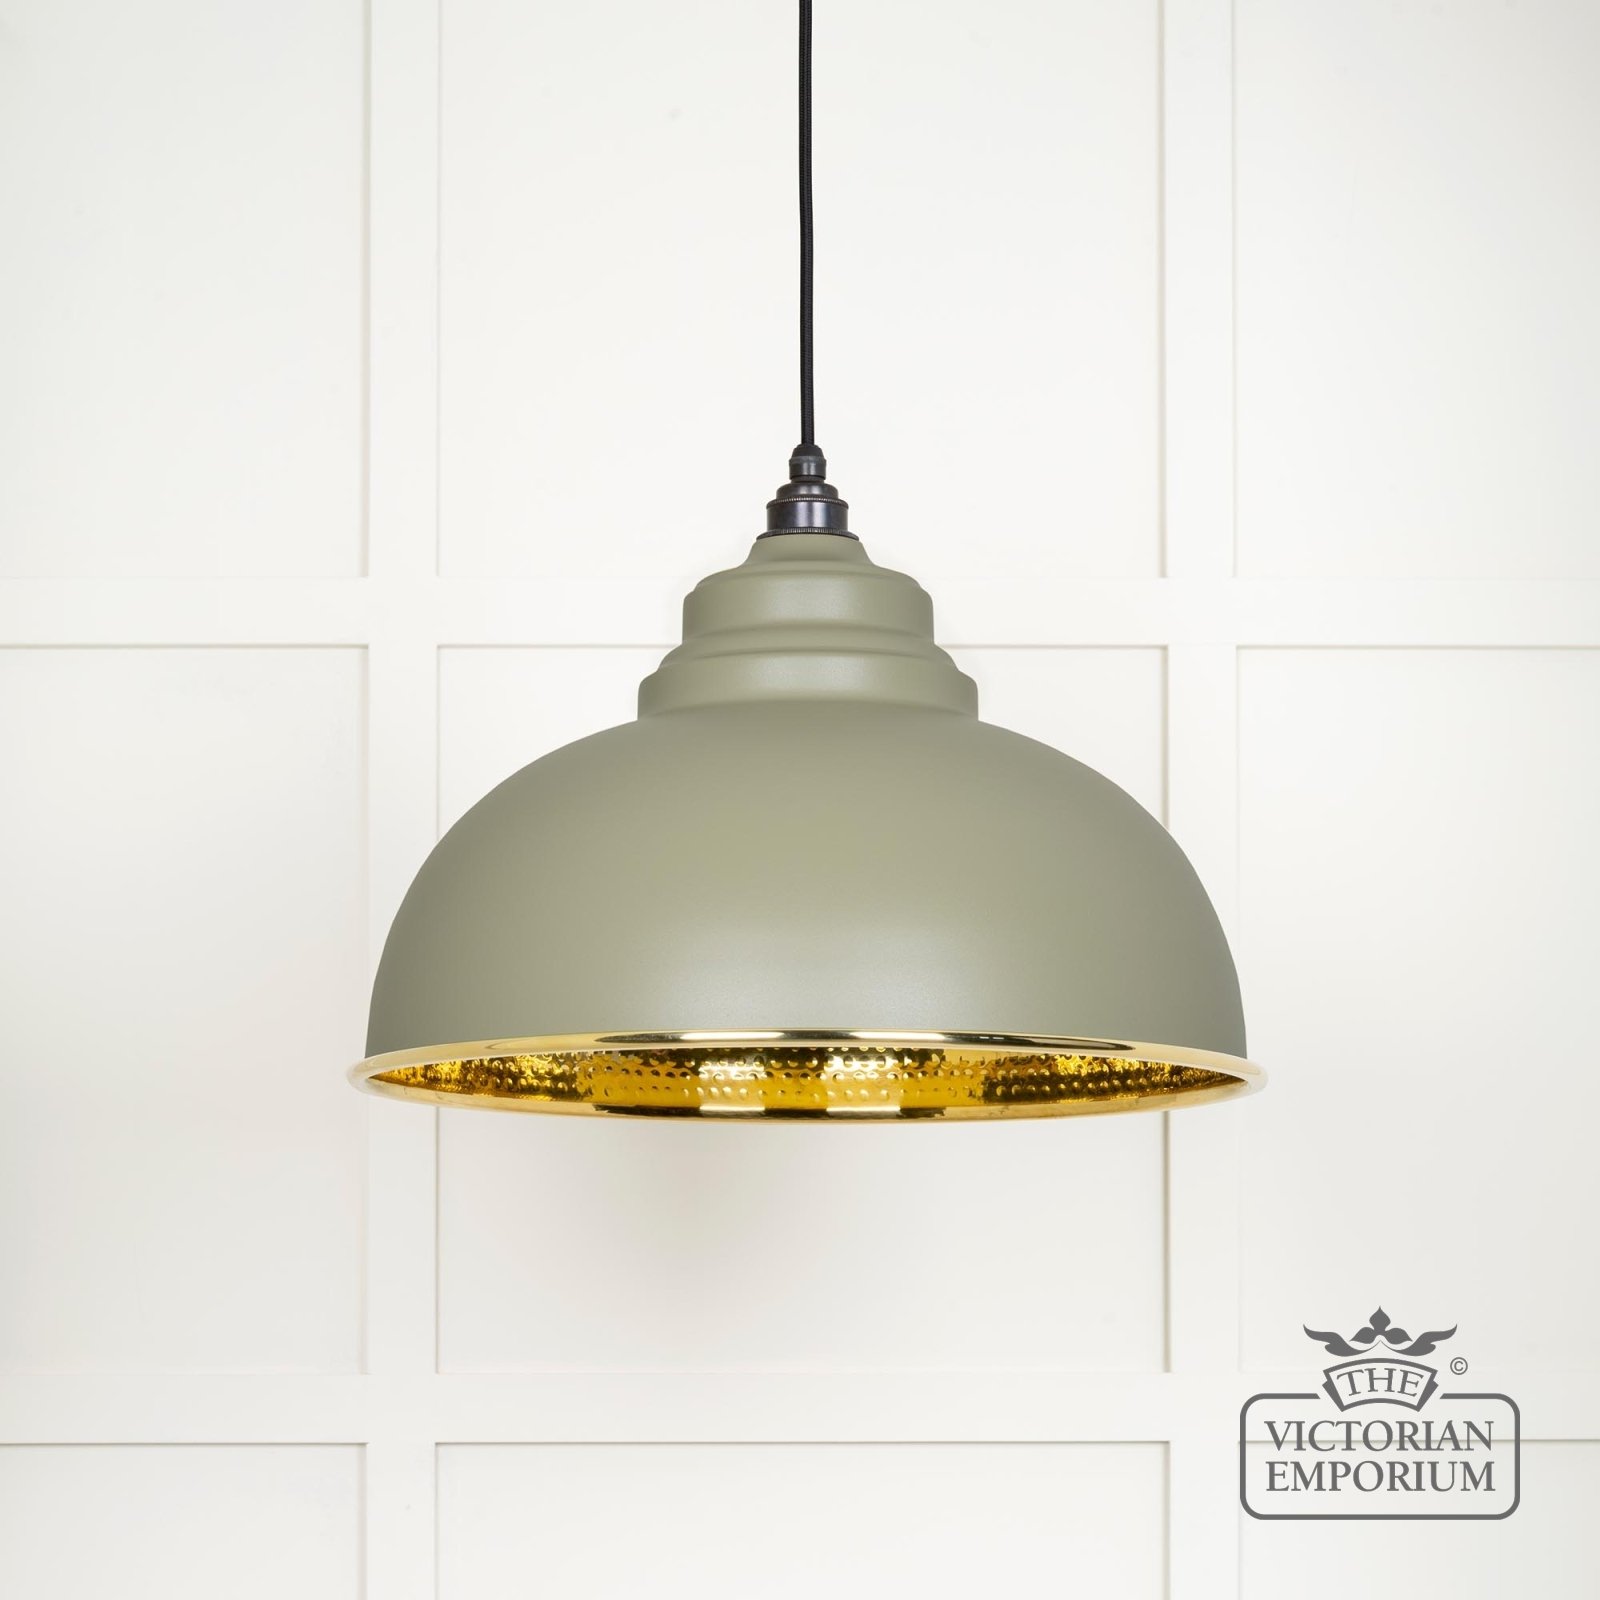 Harlow pendant light in hammered brass with painted Tump exterior